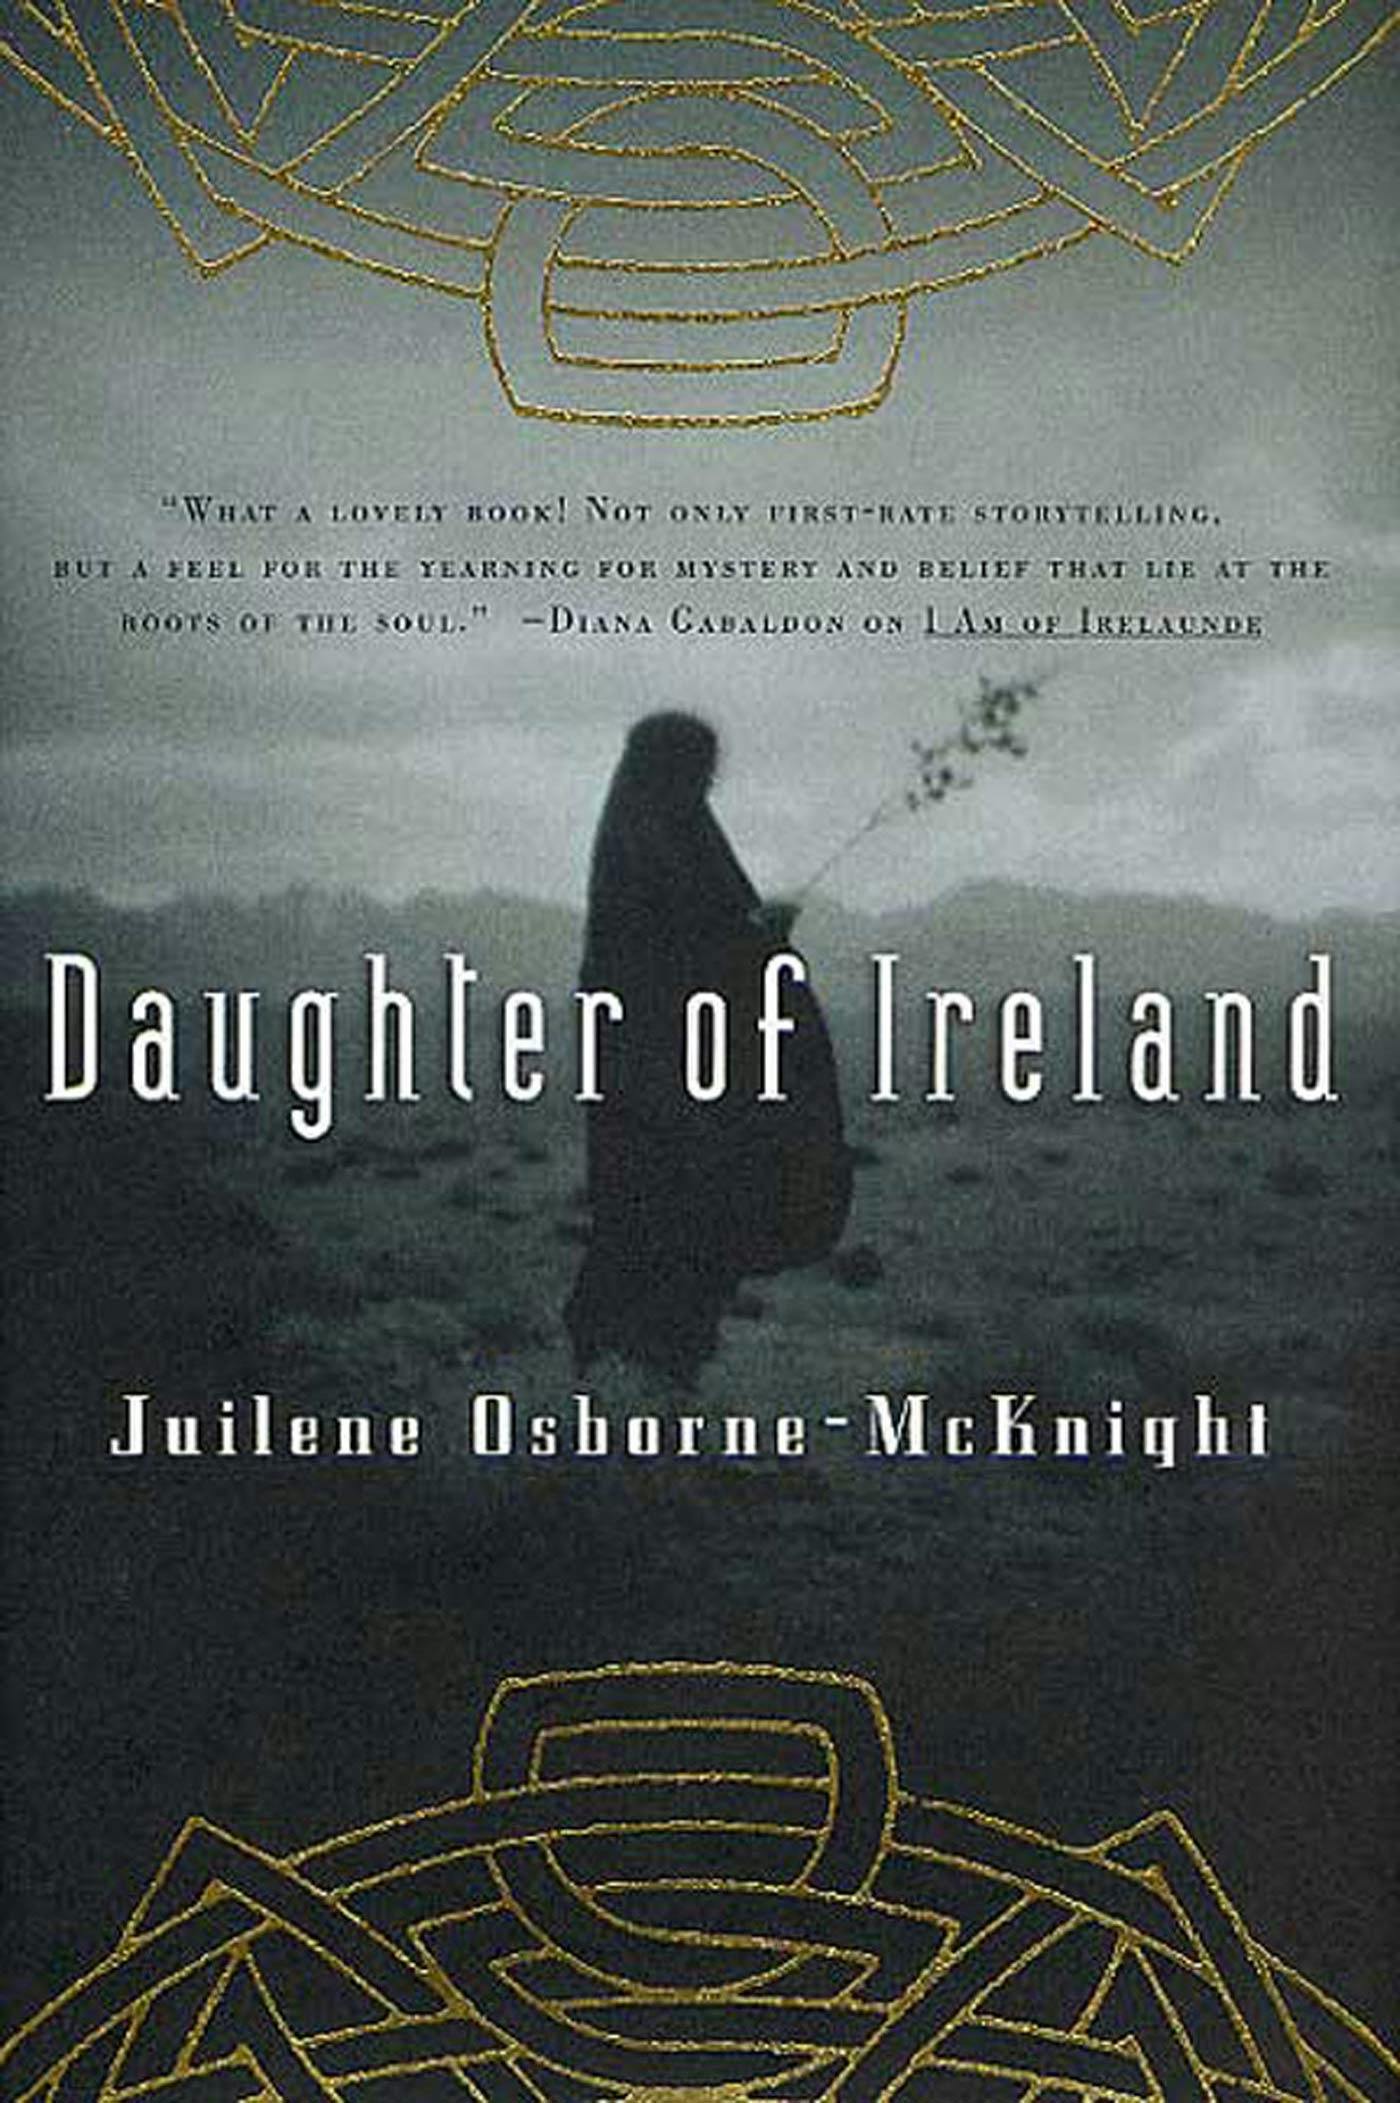 Cover for the book titled as: Daughter of Ireland